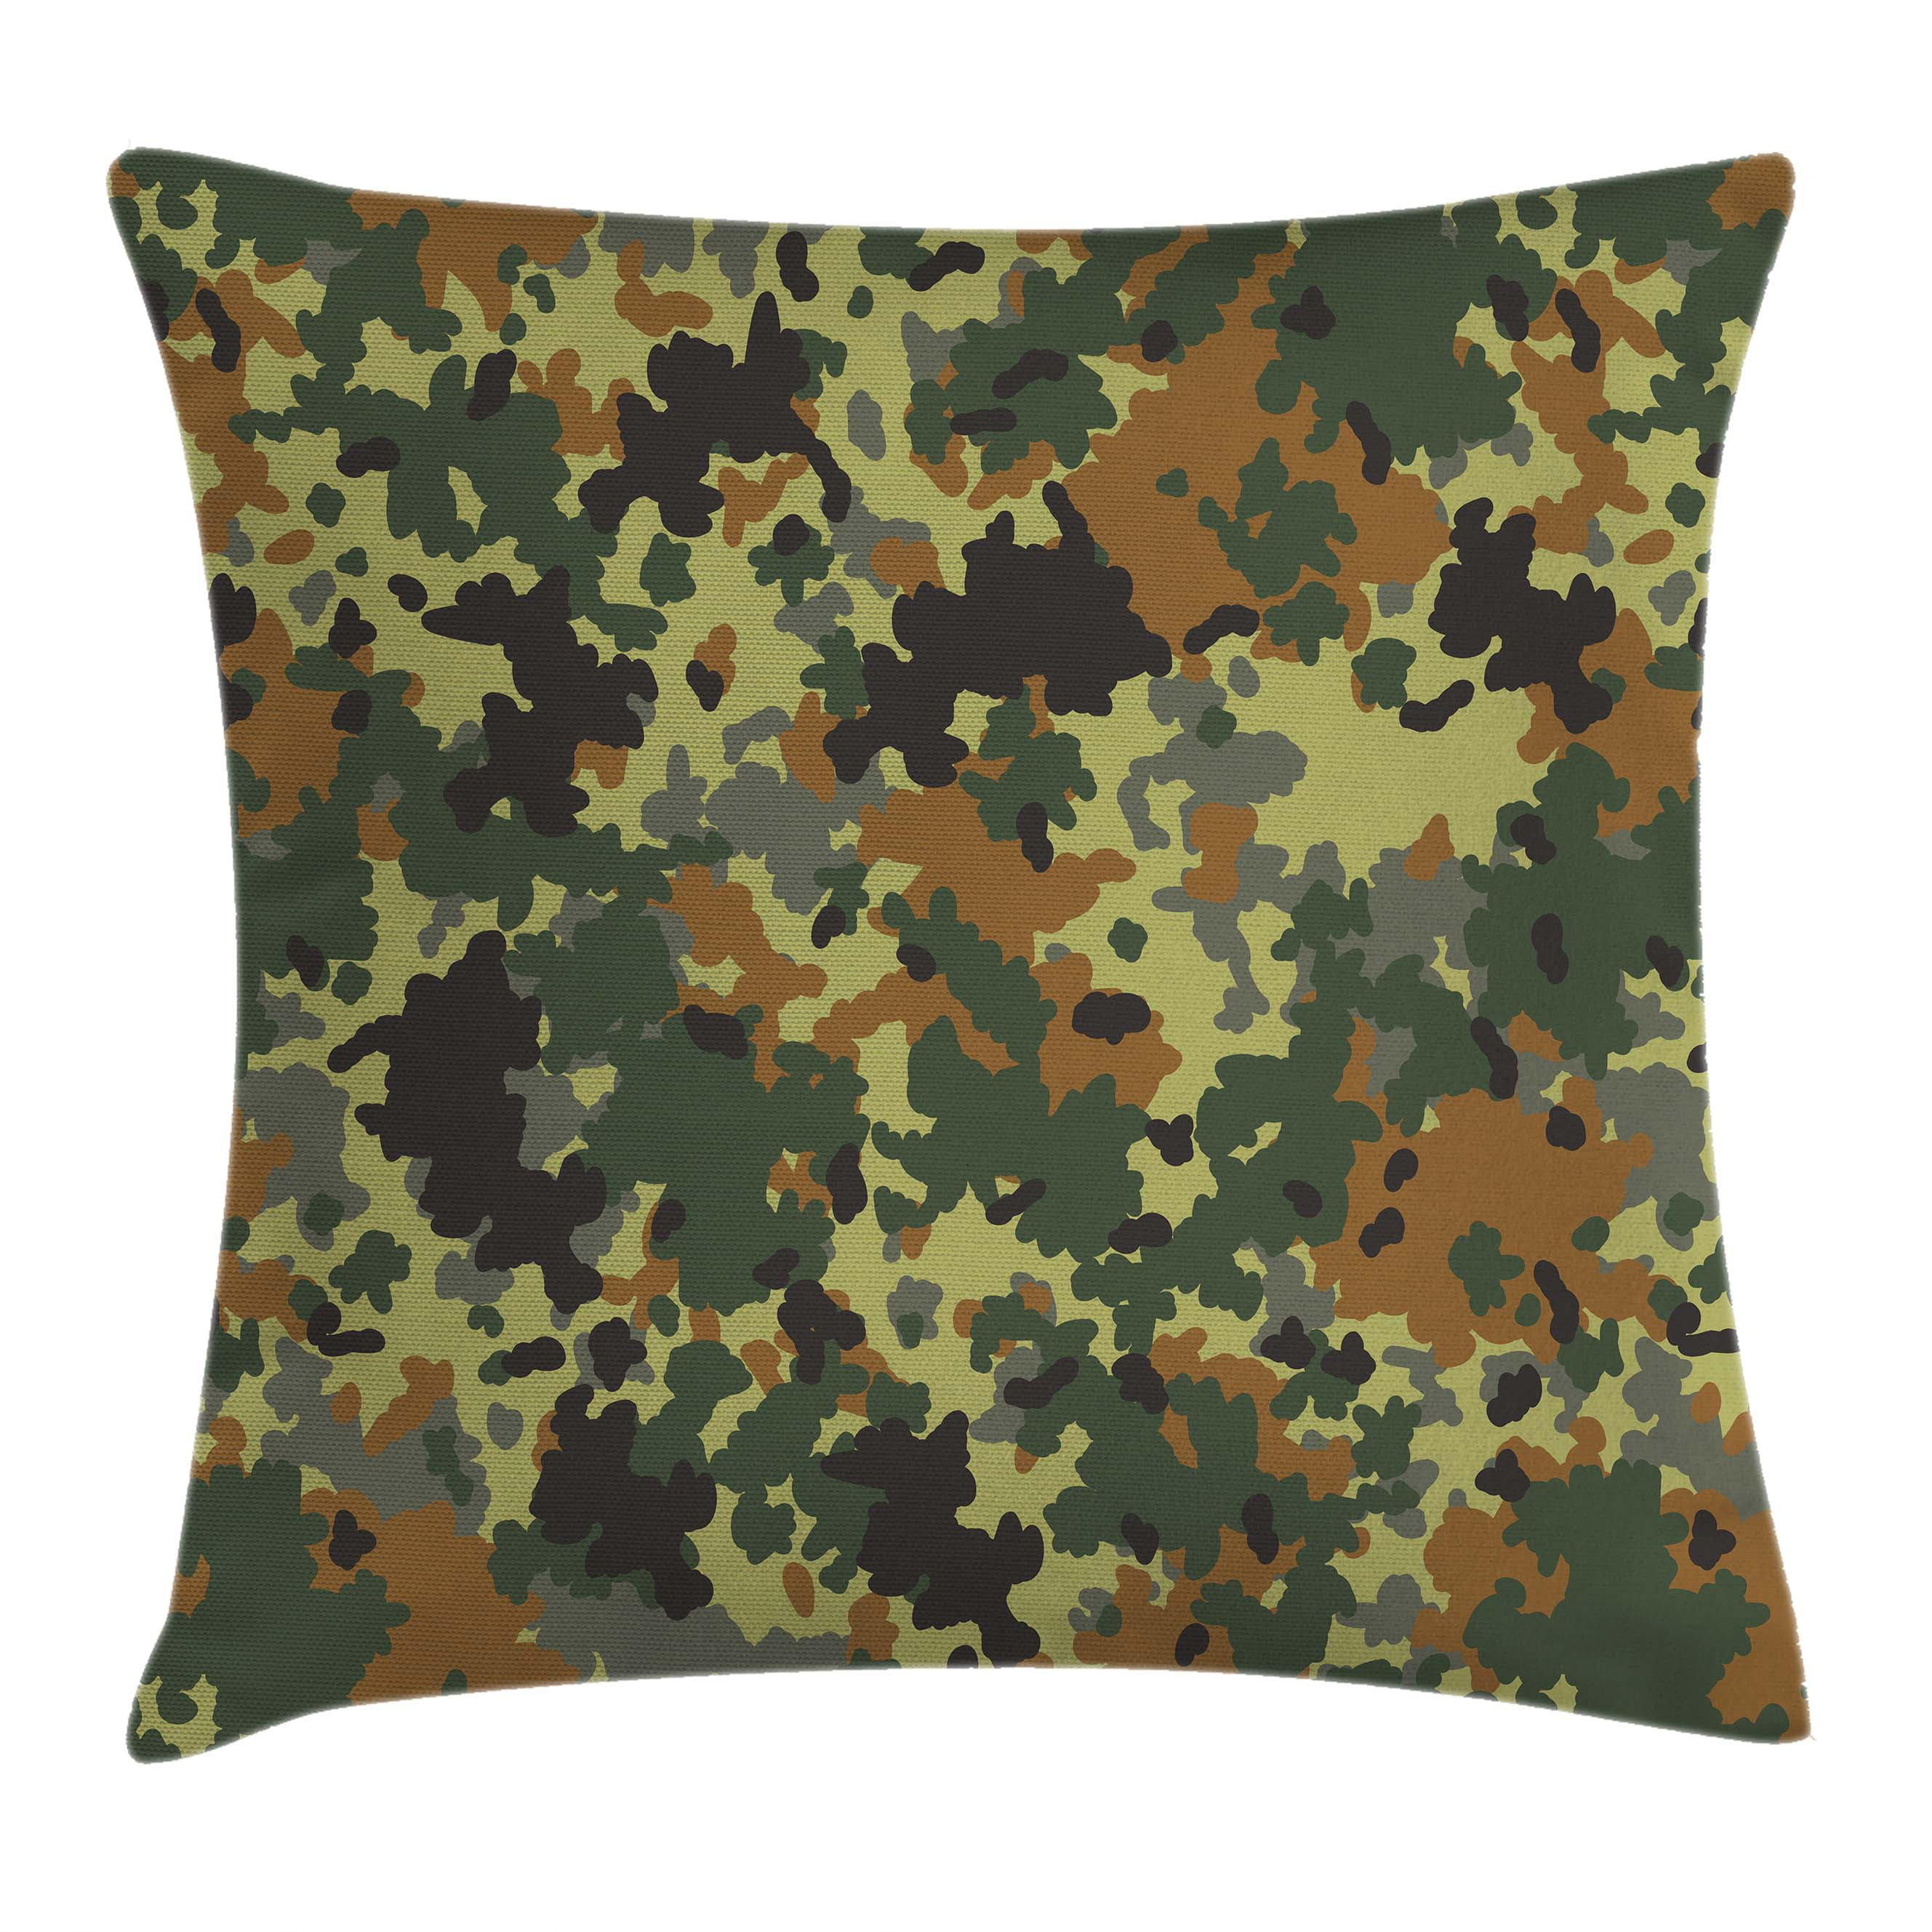 Camo Throw Pillow Cushion Cover, Classical Germany Camouflage Pattern